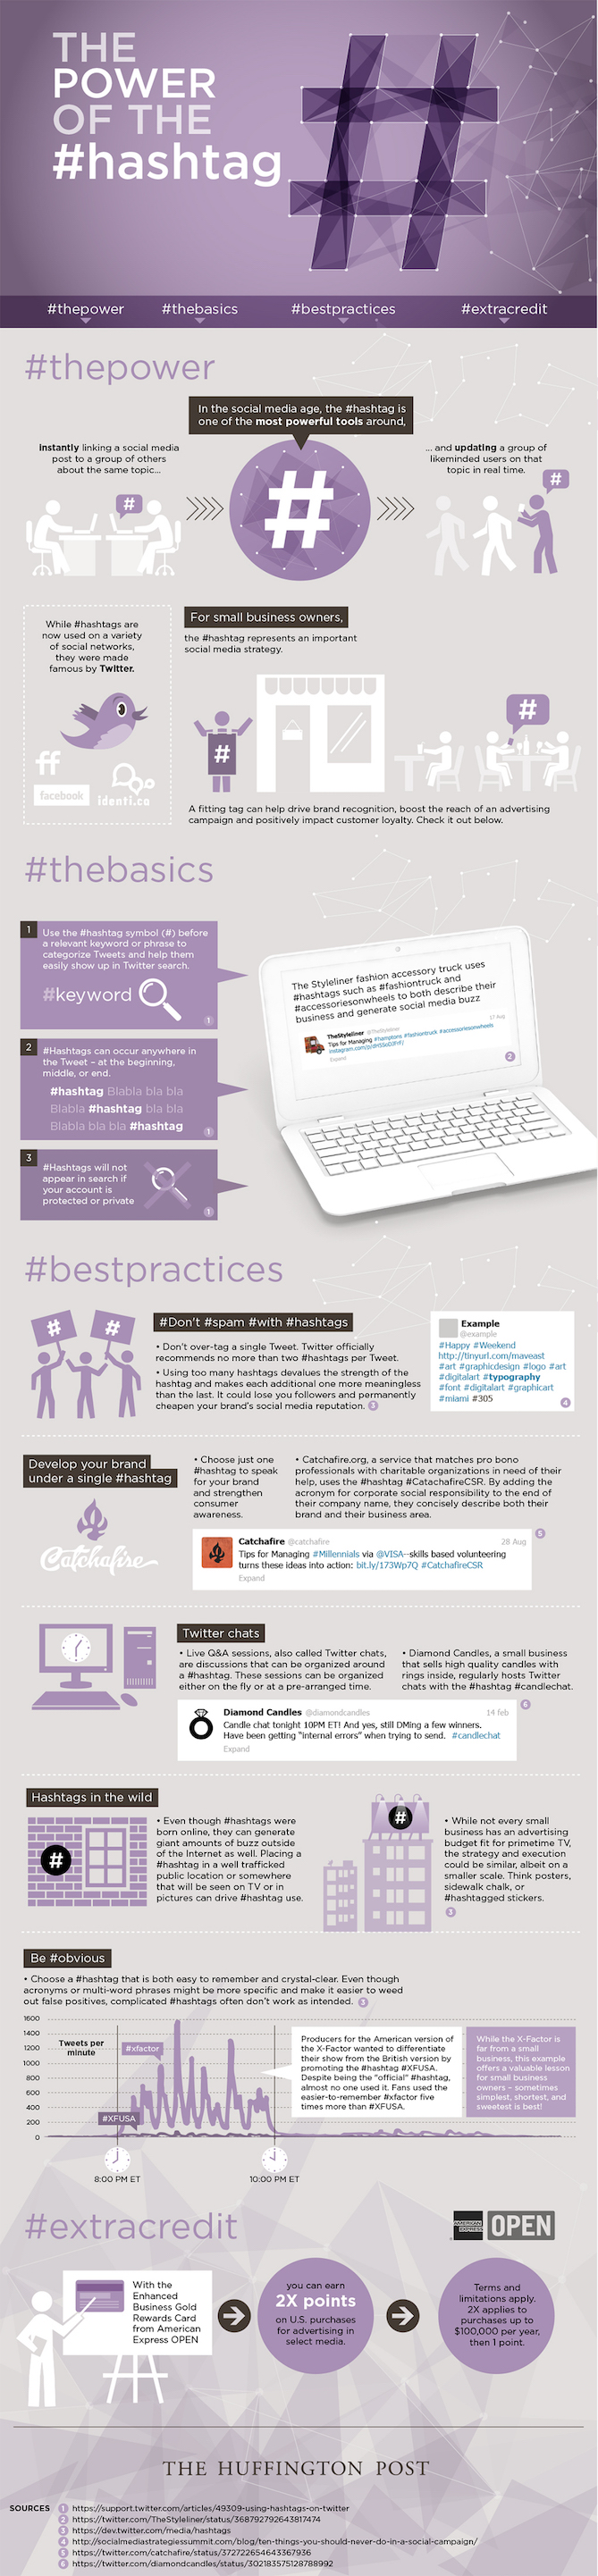 What are hashtags? [infographic]